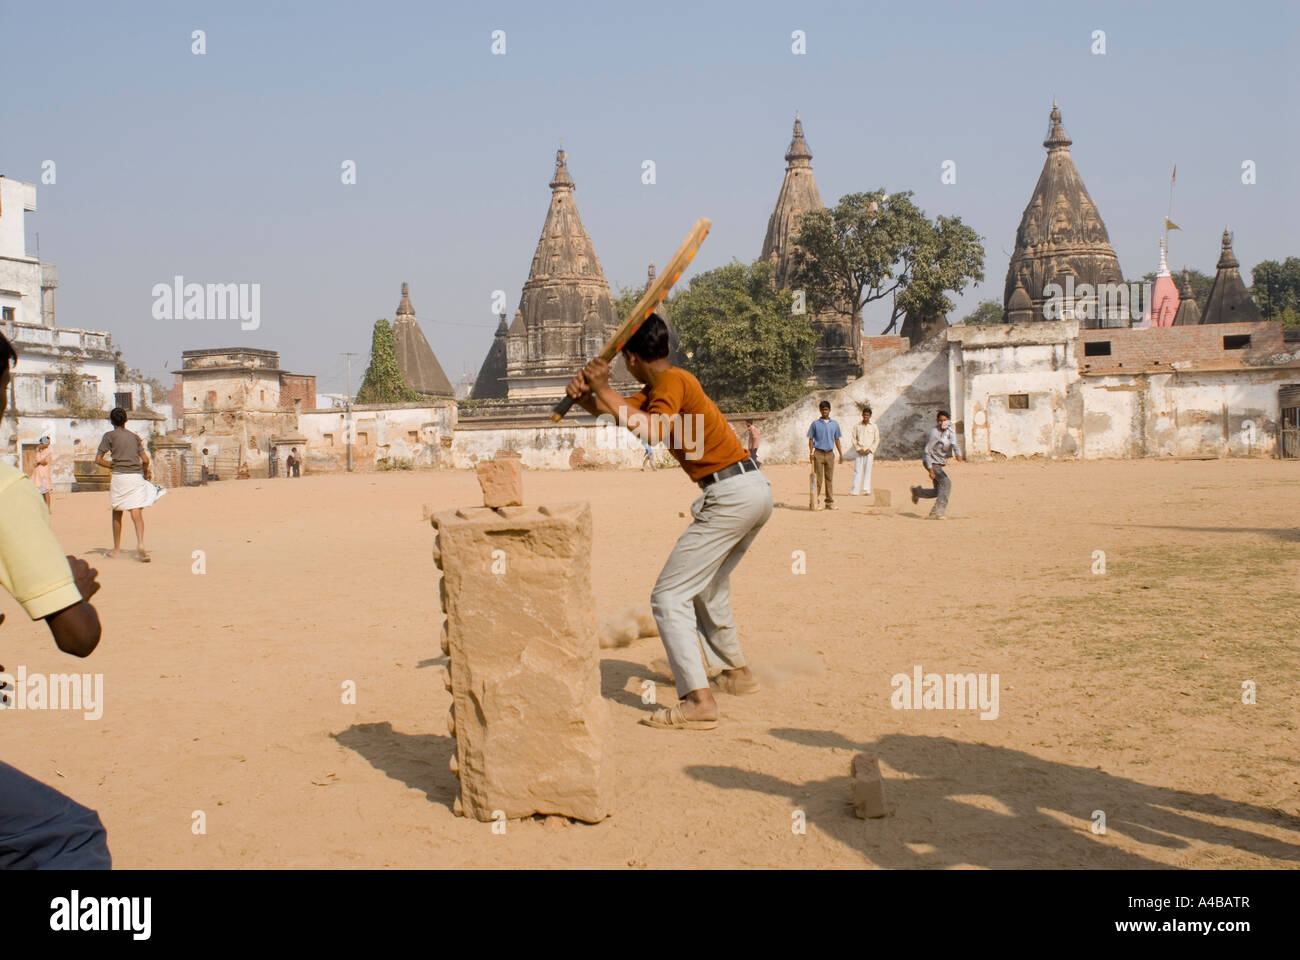 Stock image of young indian boys playing cricket on the temple grounds of a Shiva temple in Varanasi India Stock Photo